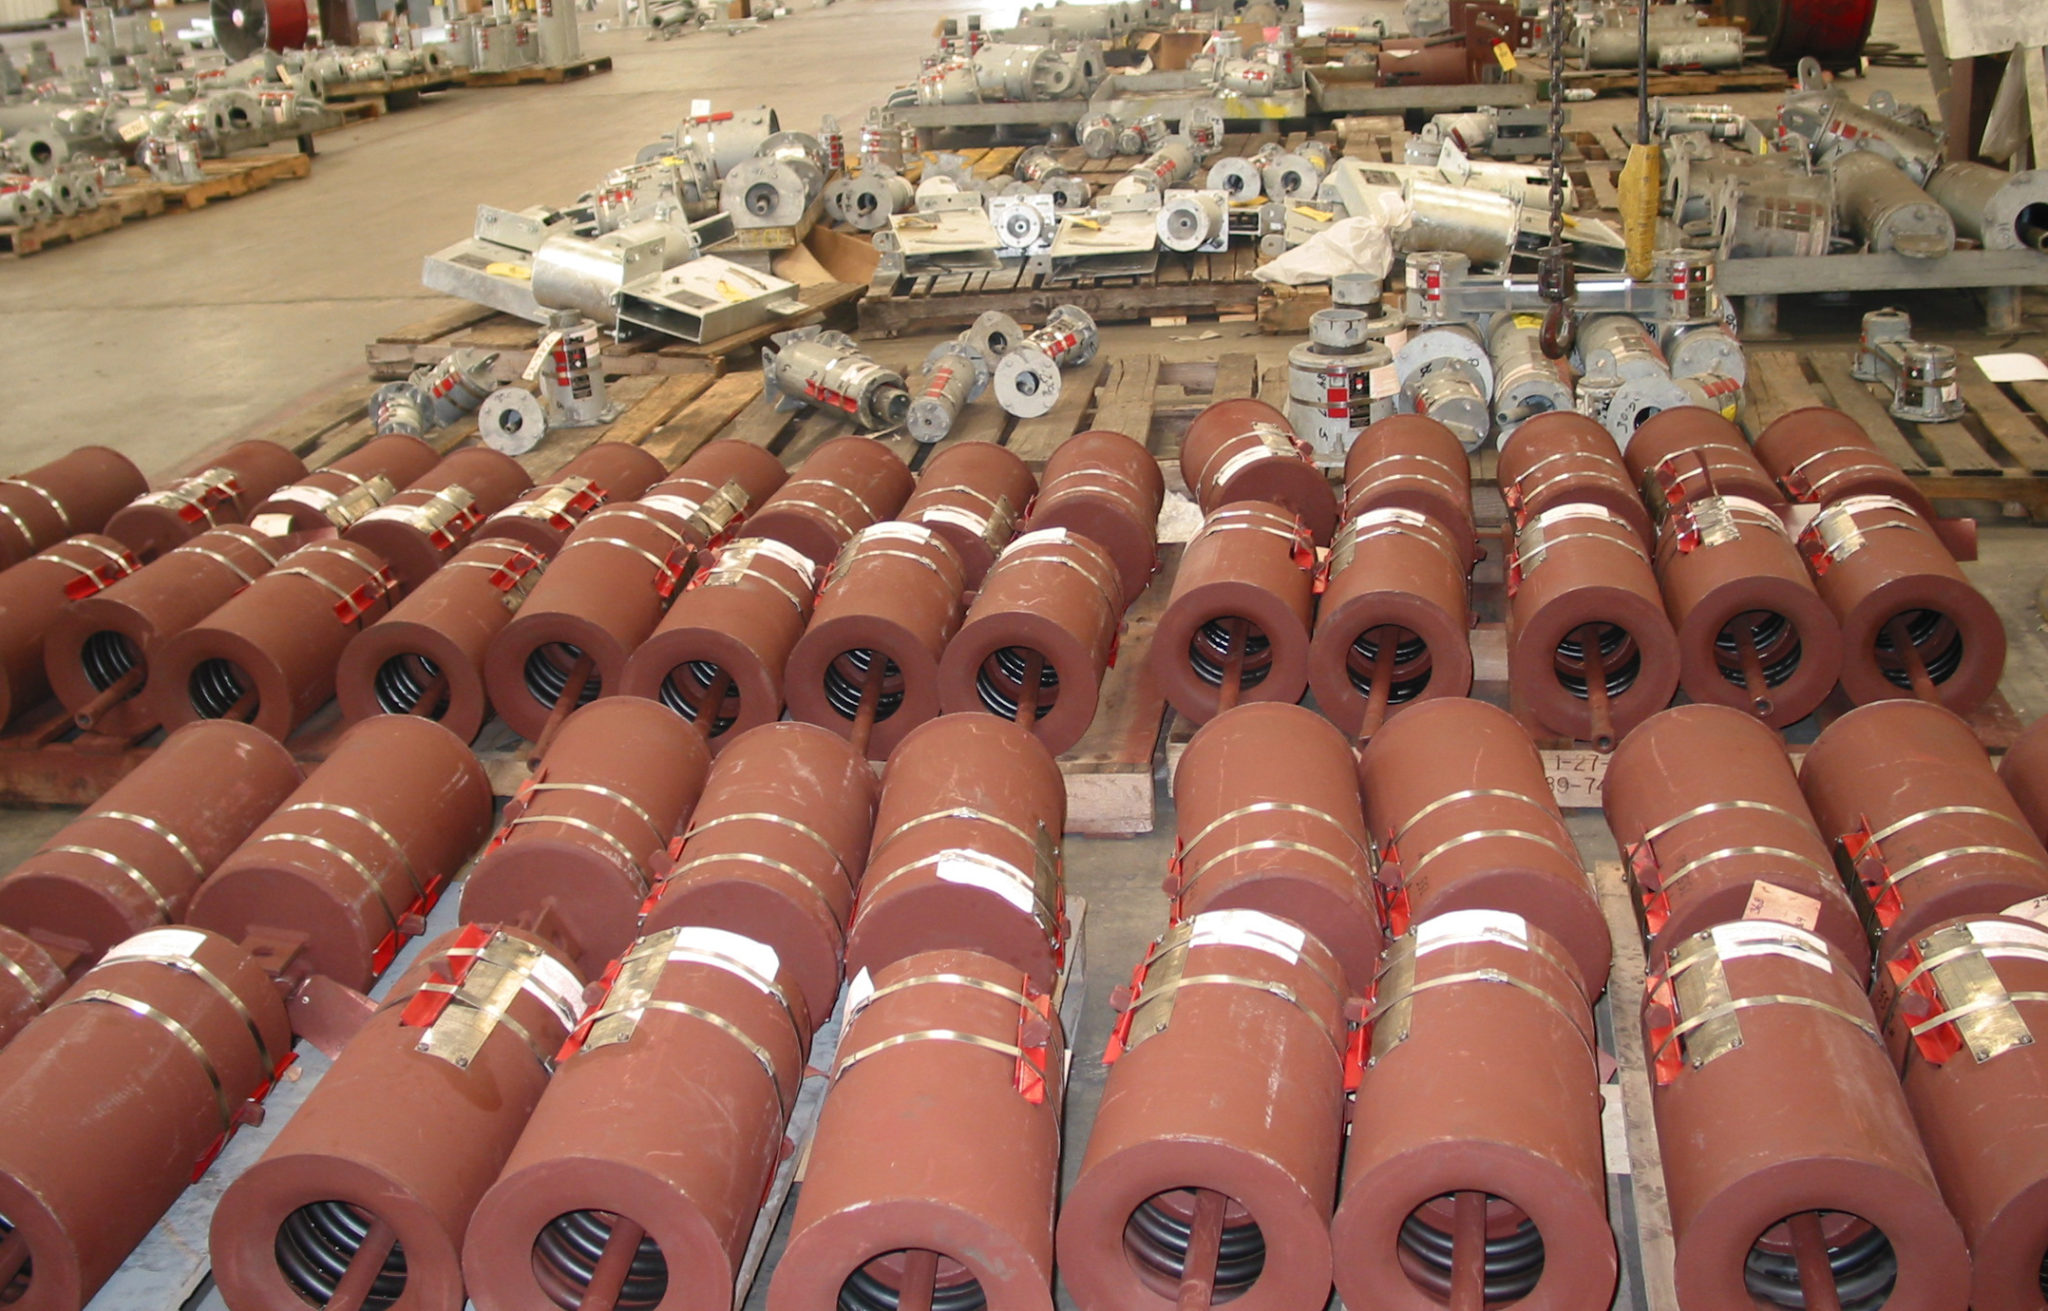 08 Furnace Spring Assemblies Up To 13000 Lbs. For A Chemical Refinery